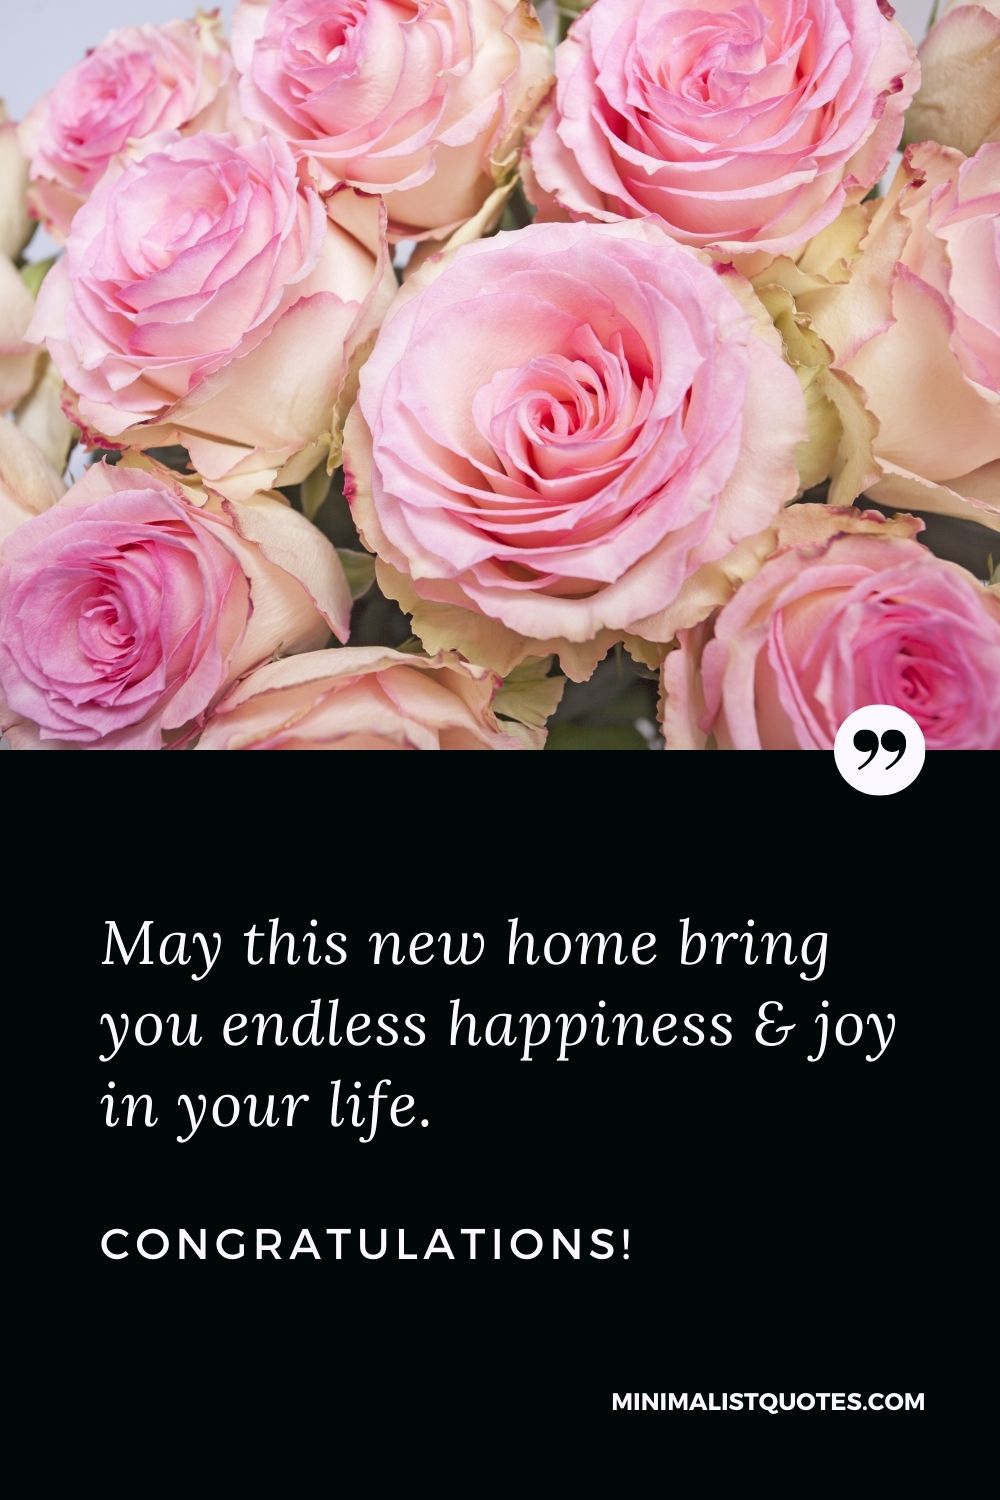 May This New Home Bring You Endless Happiness & Joy In Your Life.  Congratulations!